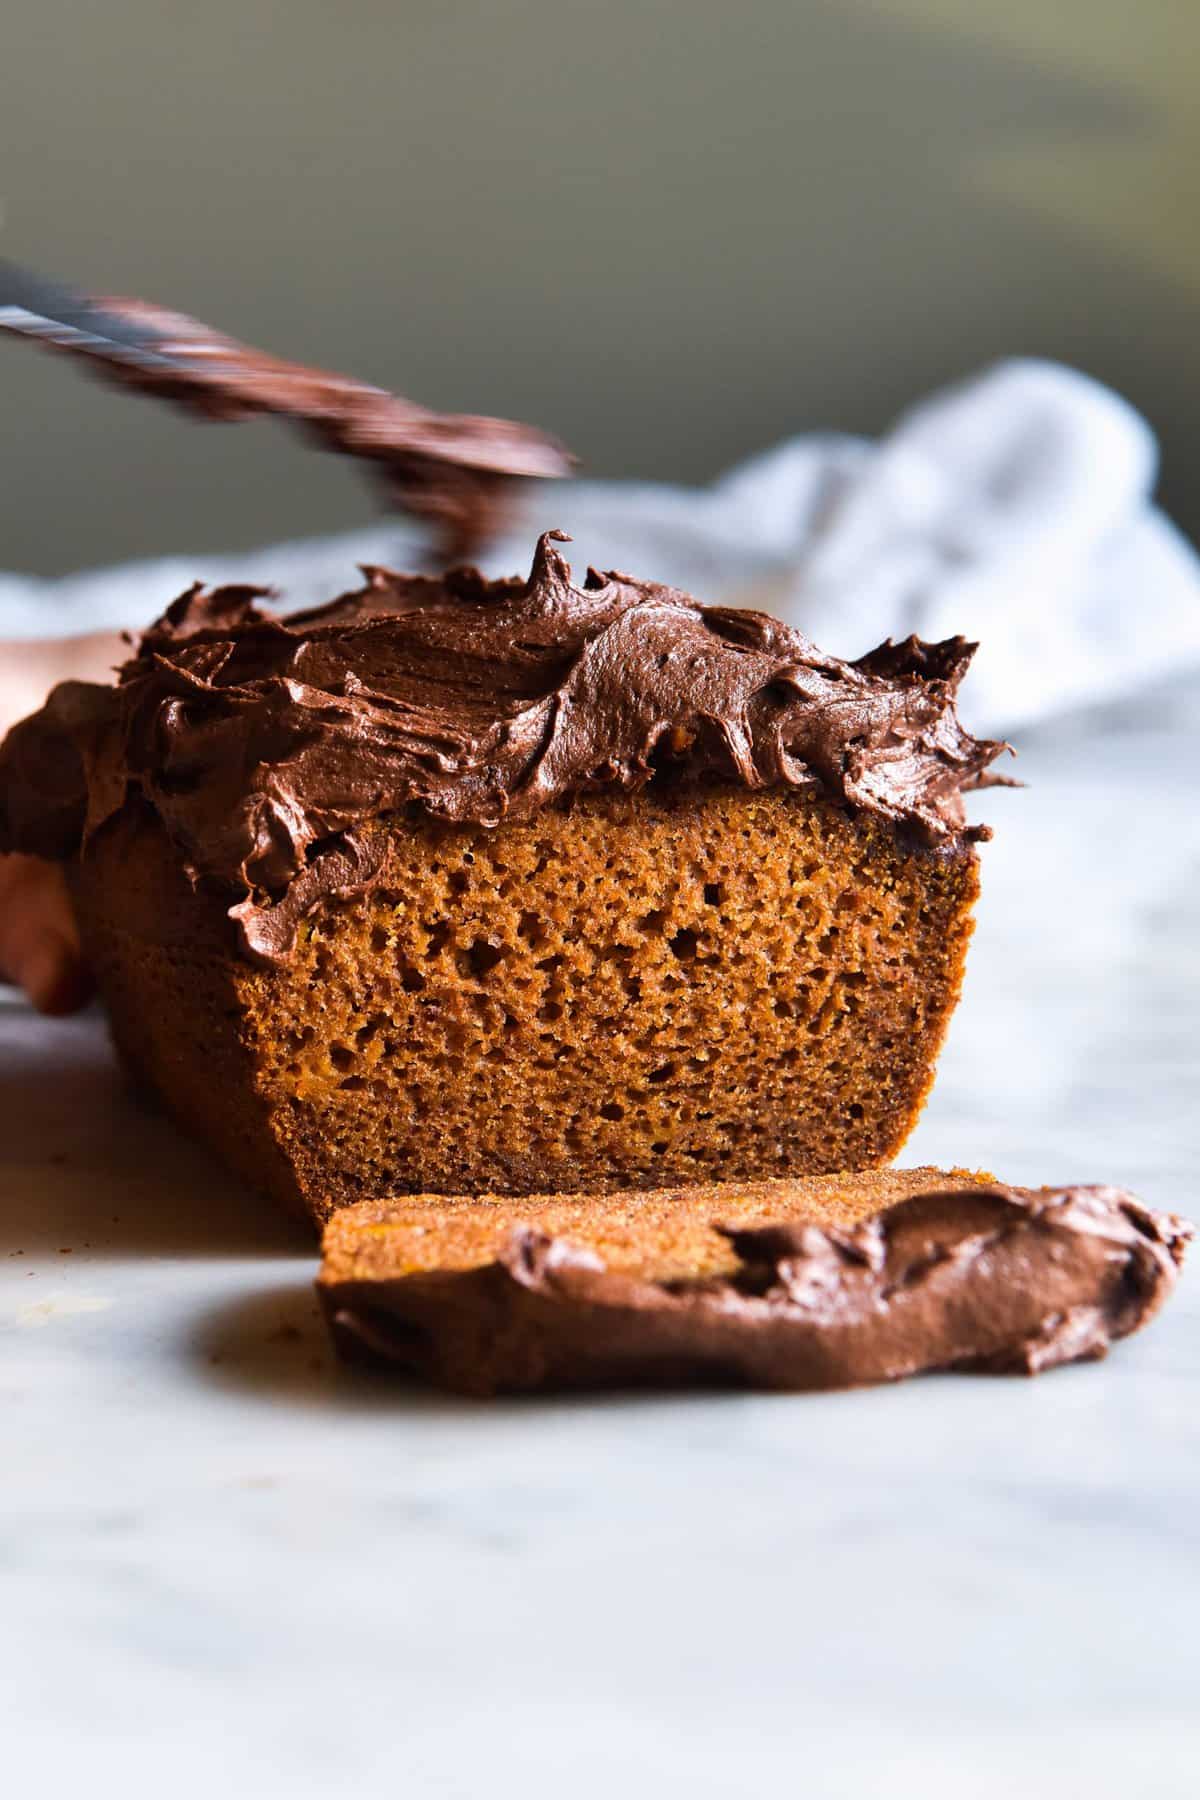 A side on view of a gluten free pumpkin loaf topped with chocolate chai icing. The loaf has been sliced to reveal the bright orange crumb. It sits on a white marble table against a light backdrop.